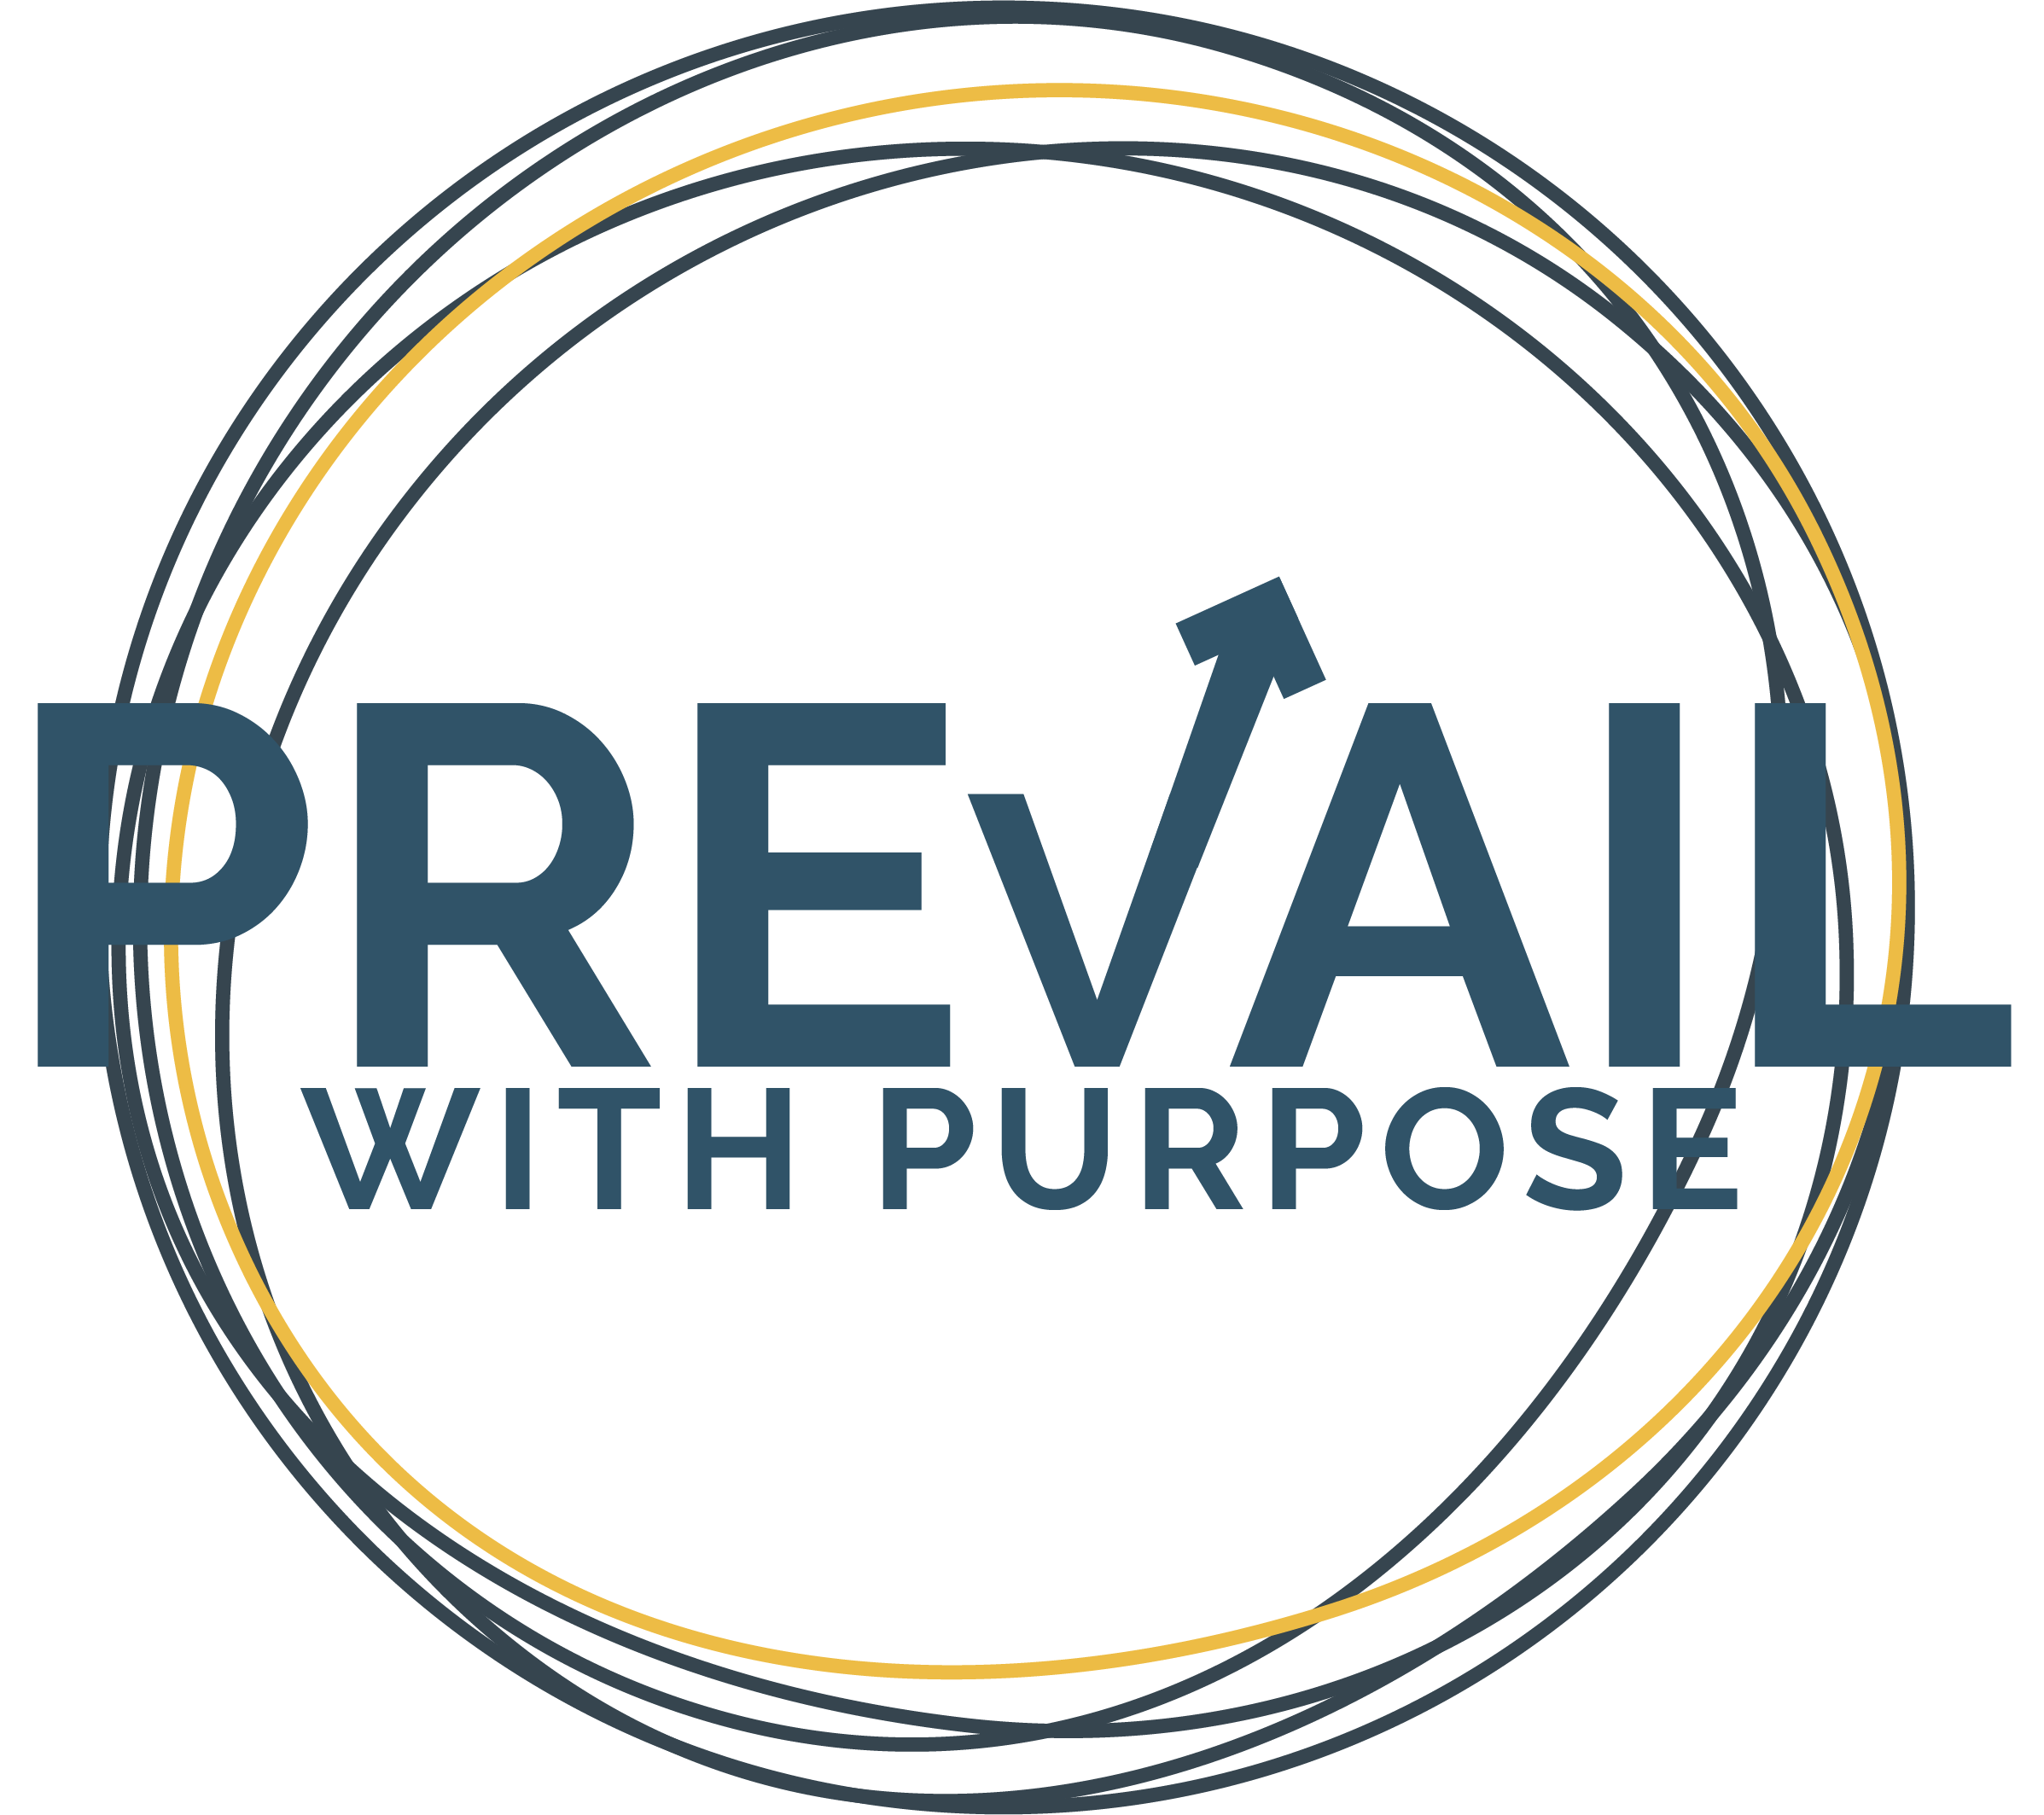 PREVAIL WITH PURPOSE online personal values course logo